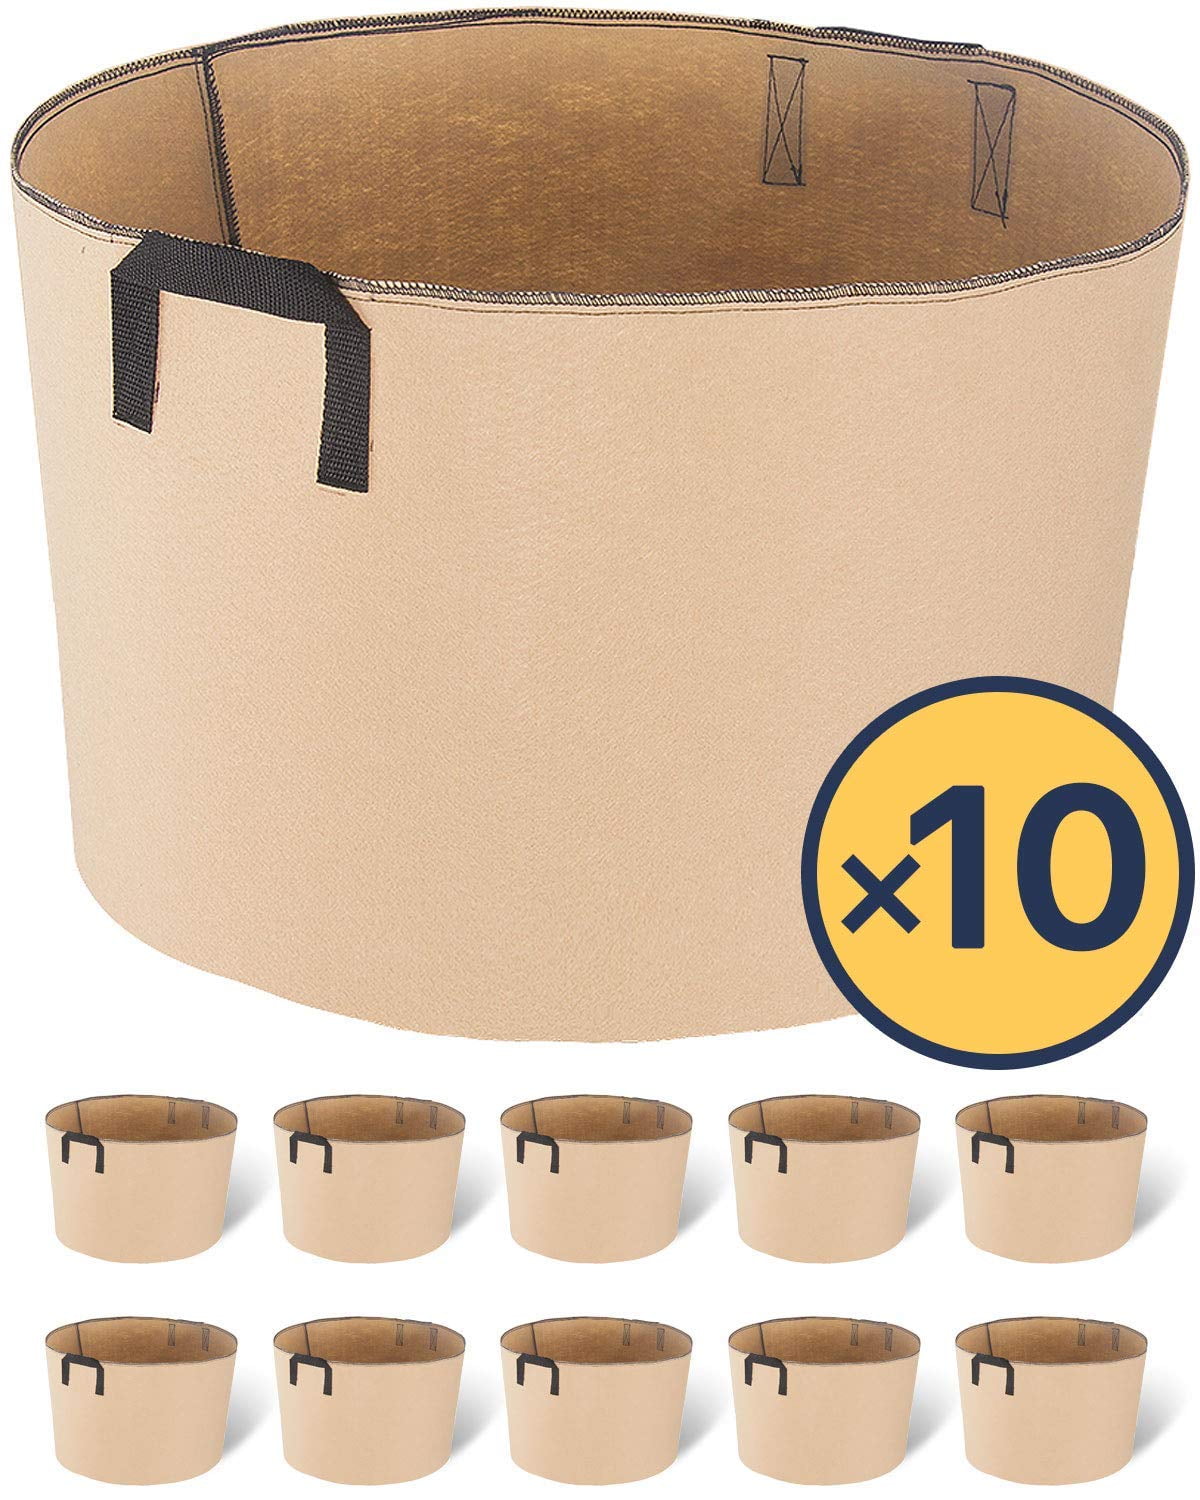 Details about   10 20 Pack Fabric Grow Pots Aeration Plant Planter Bags Root Garden Container 